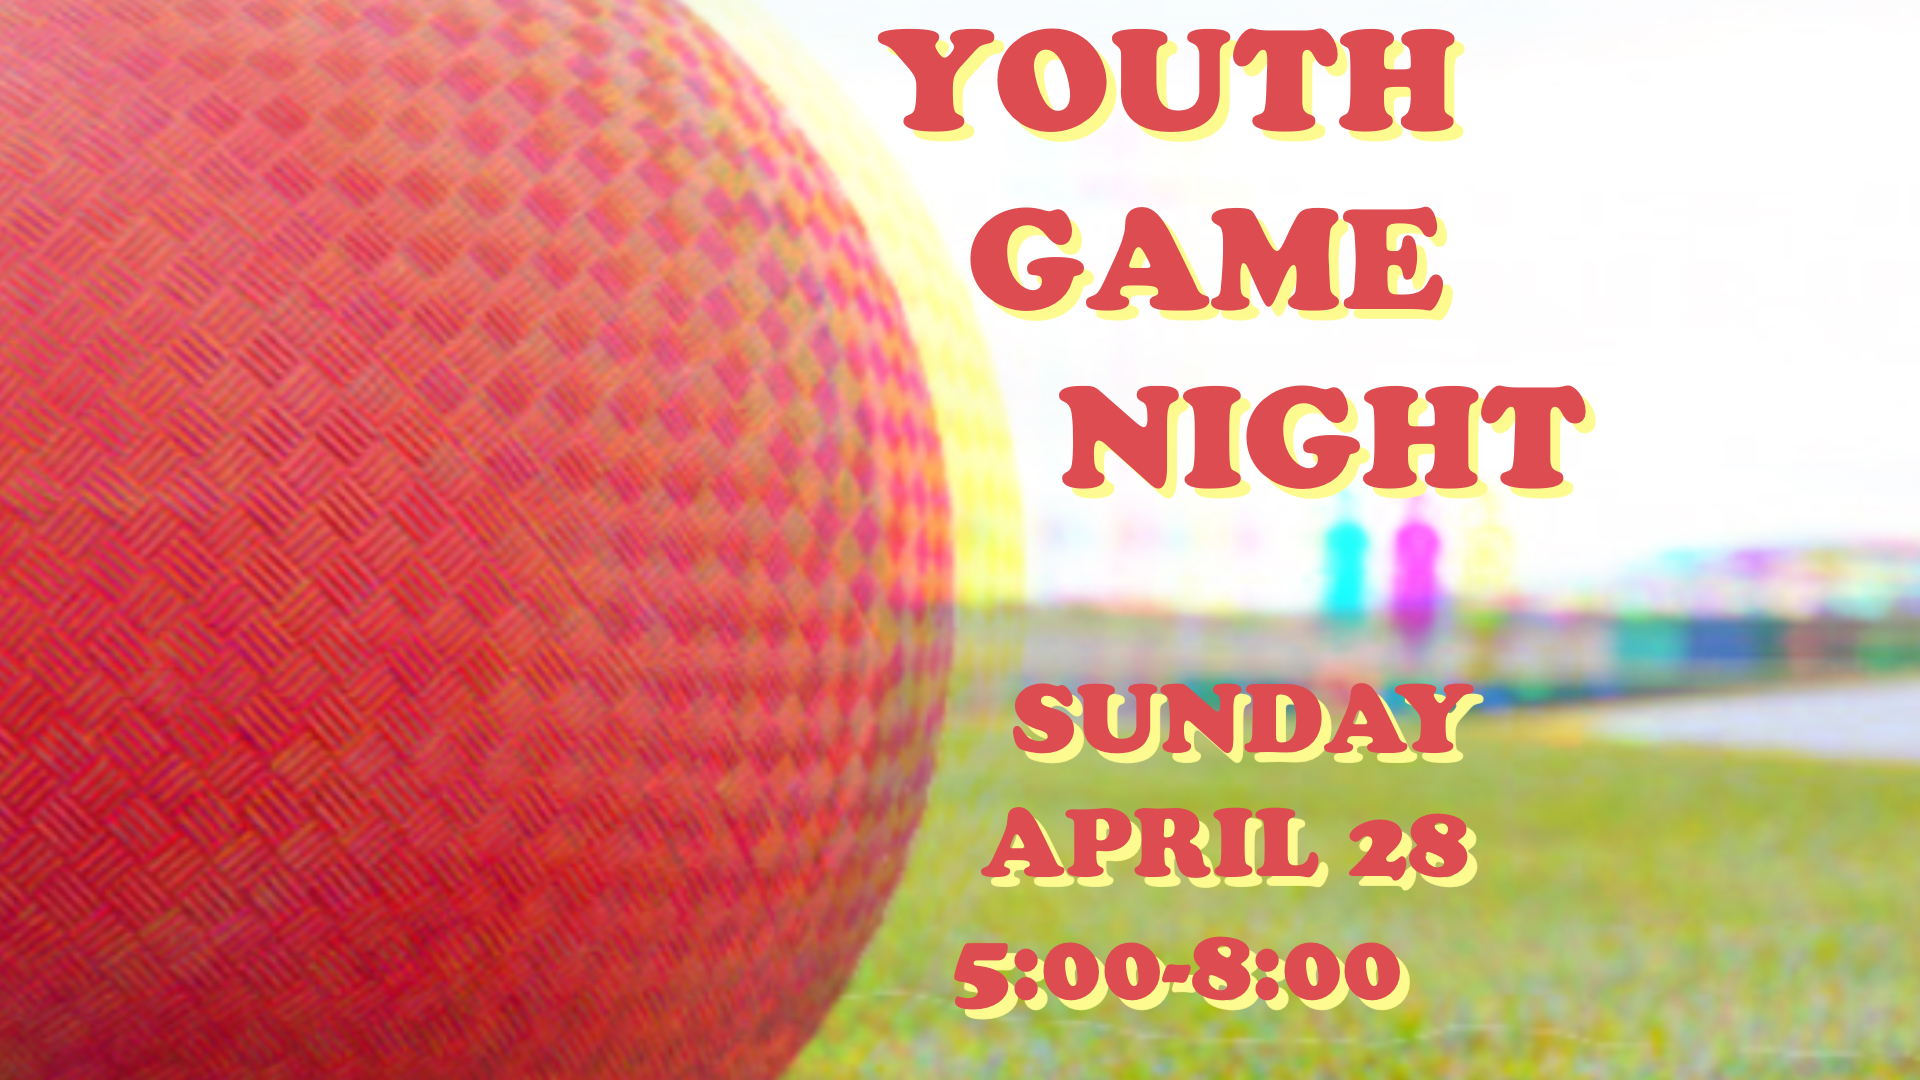 YOUTH GAME NIGHT